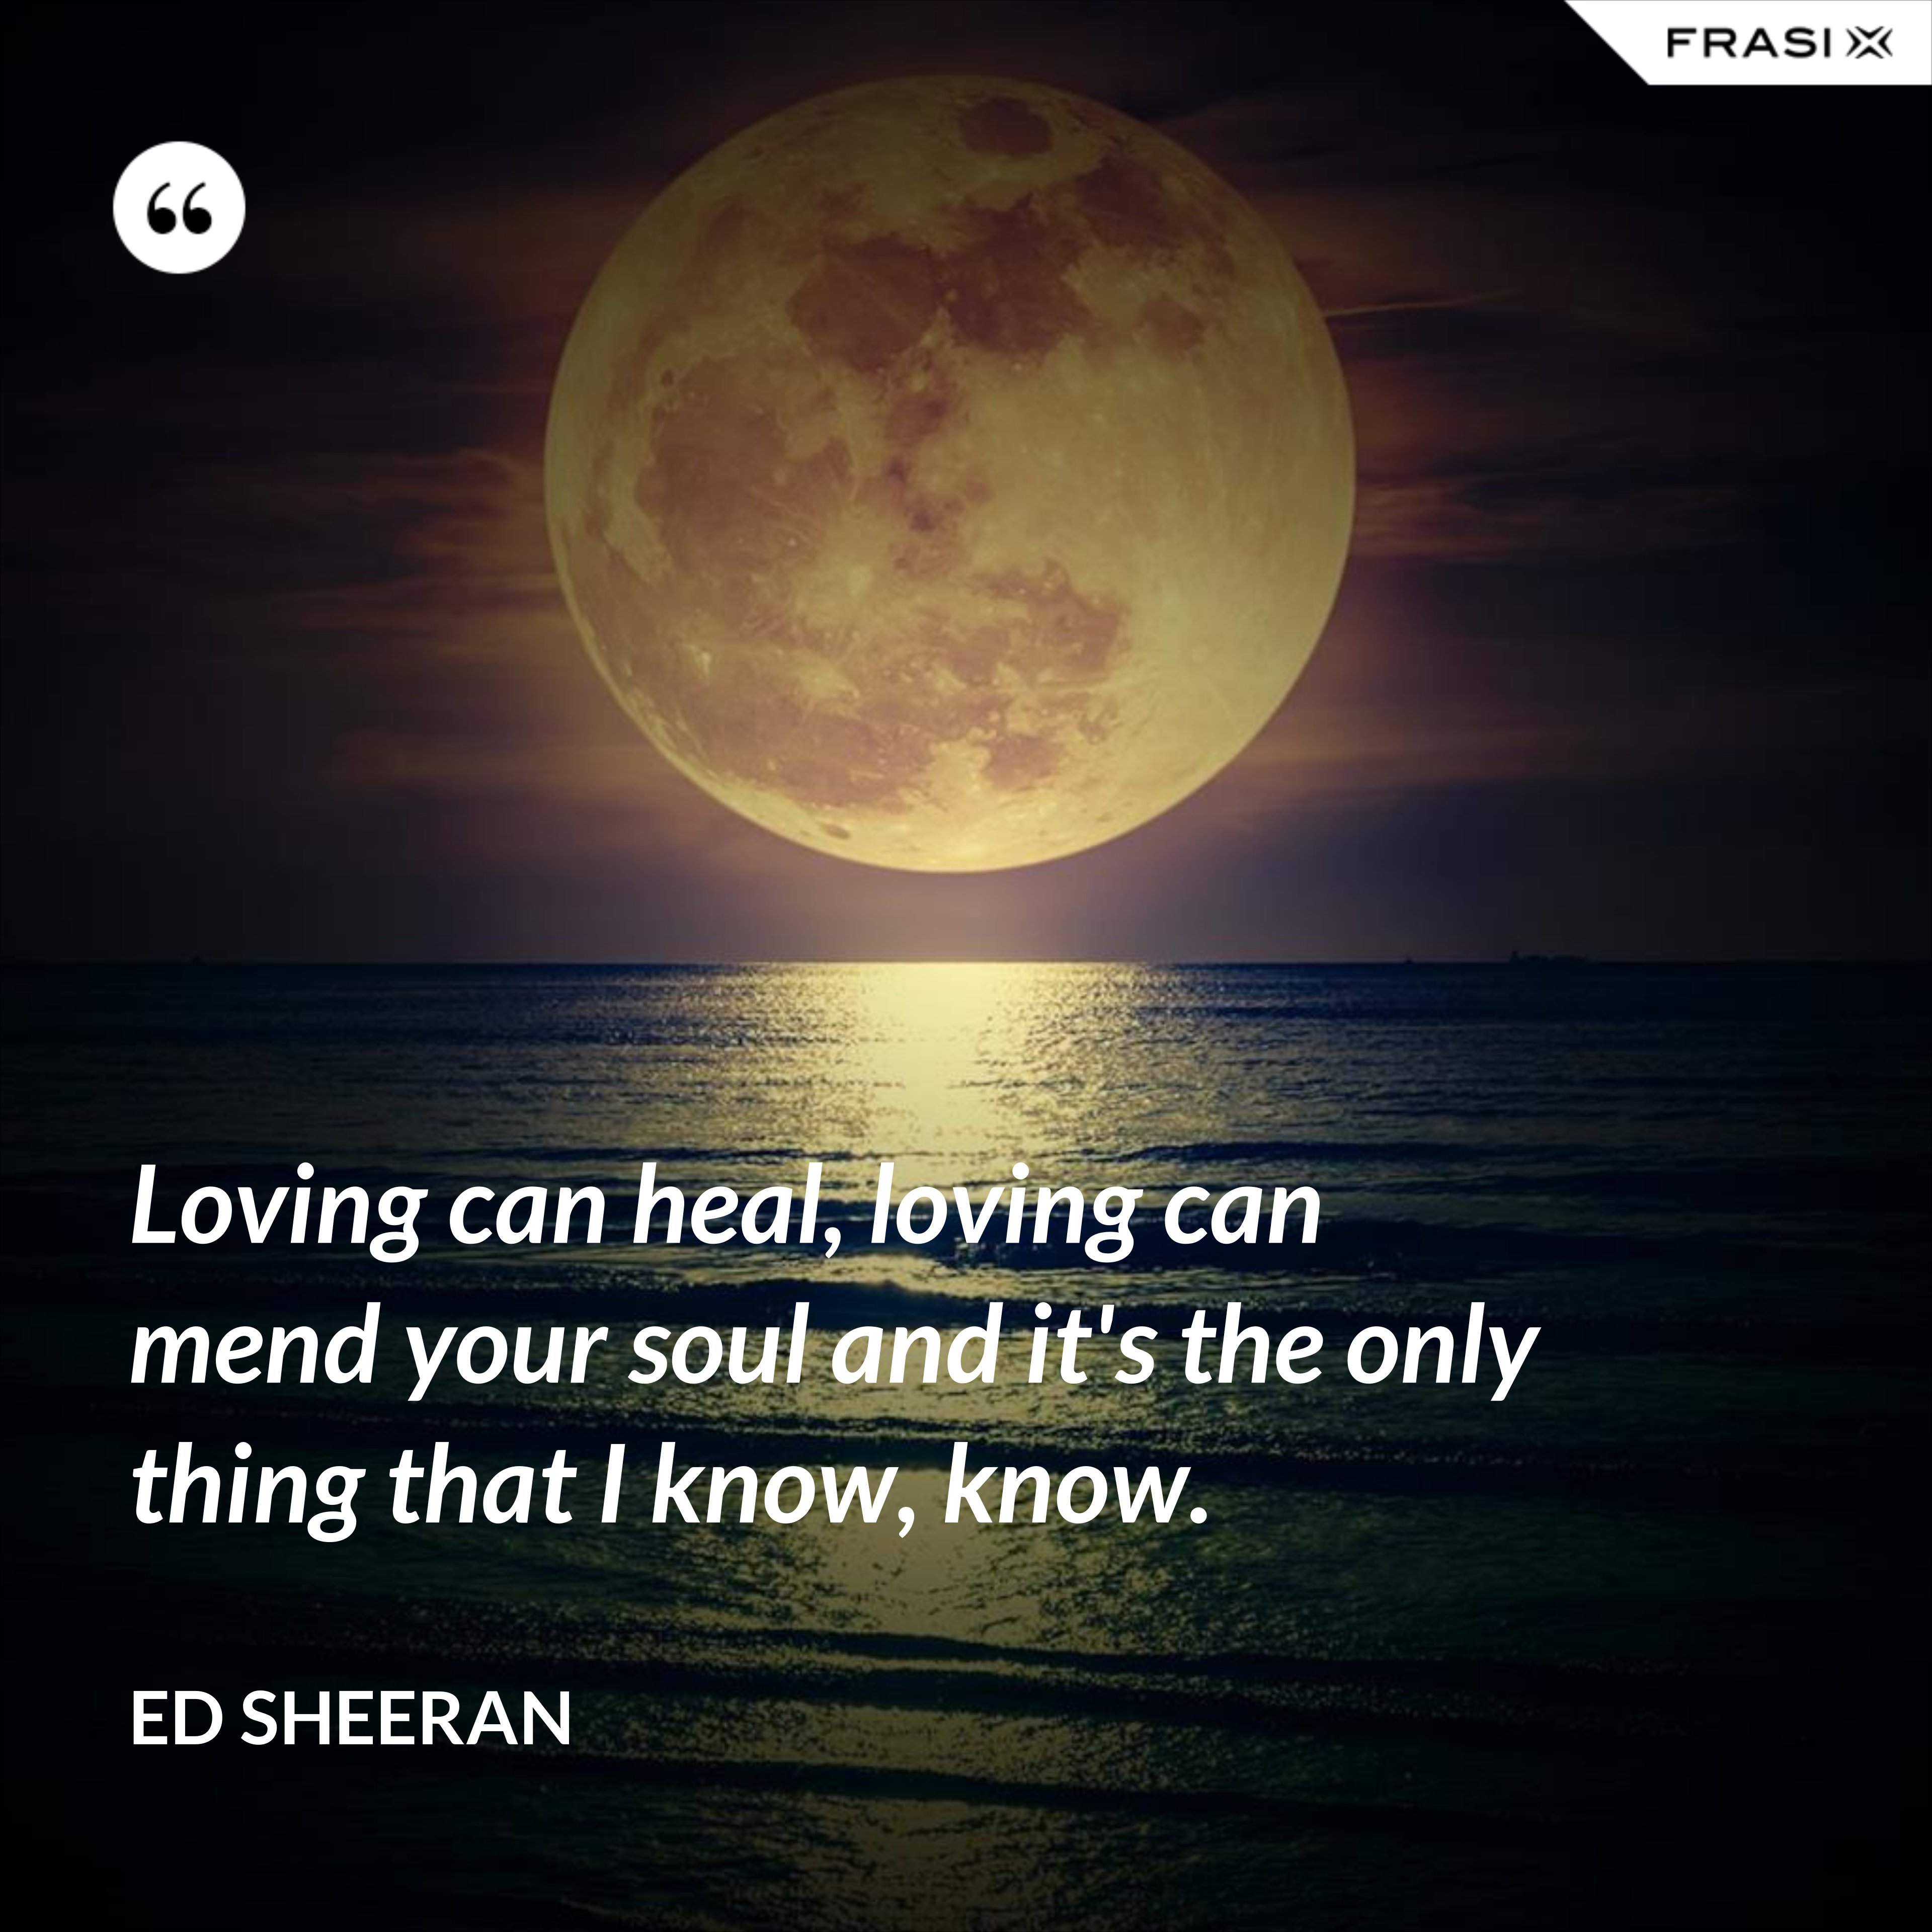 Loving can heal, loving can mend your soul and it's the only thing that I know, know. - Ed Sheeran